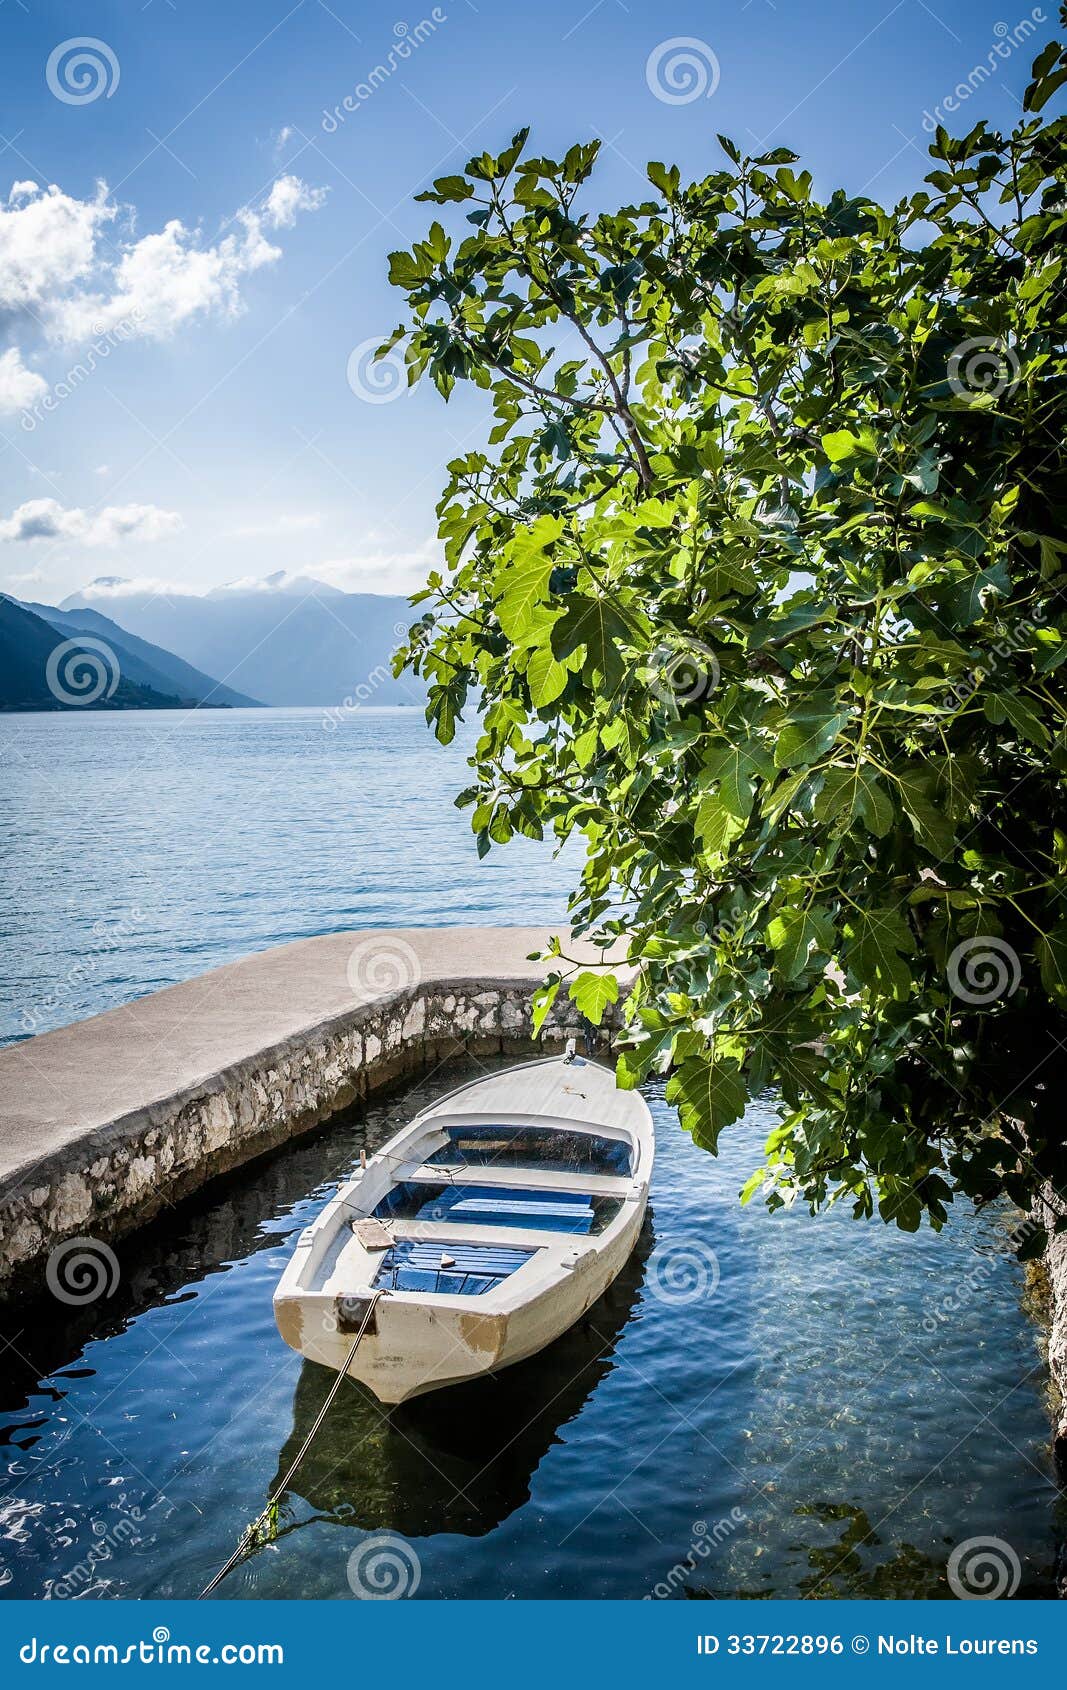 Image of a white row boat tied down in a private old stone dock with a 